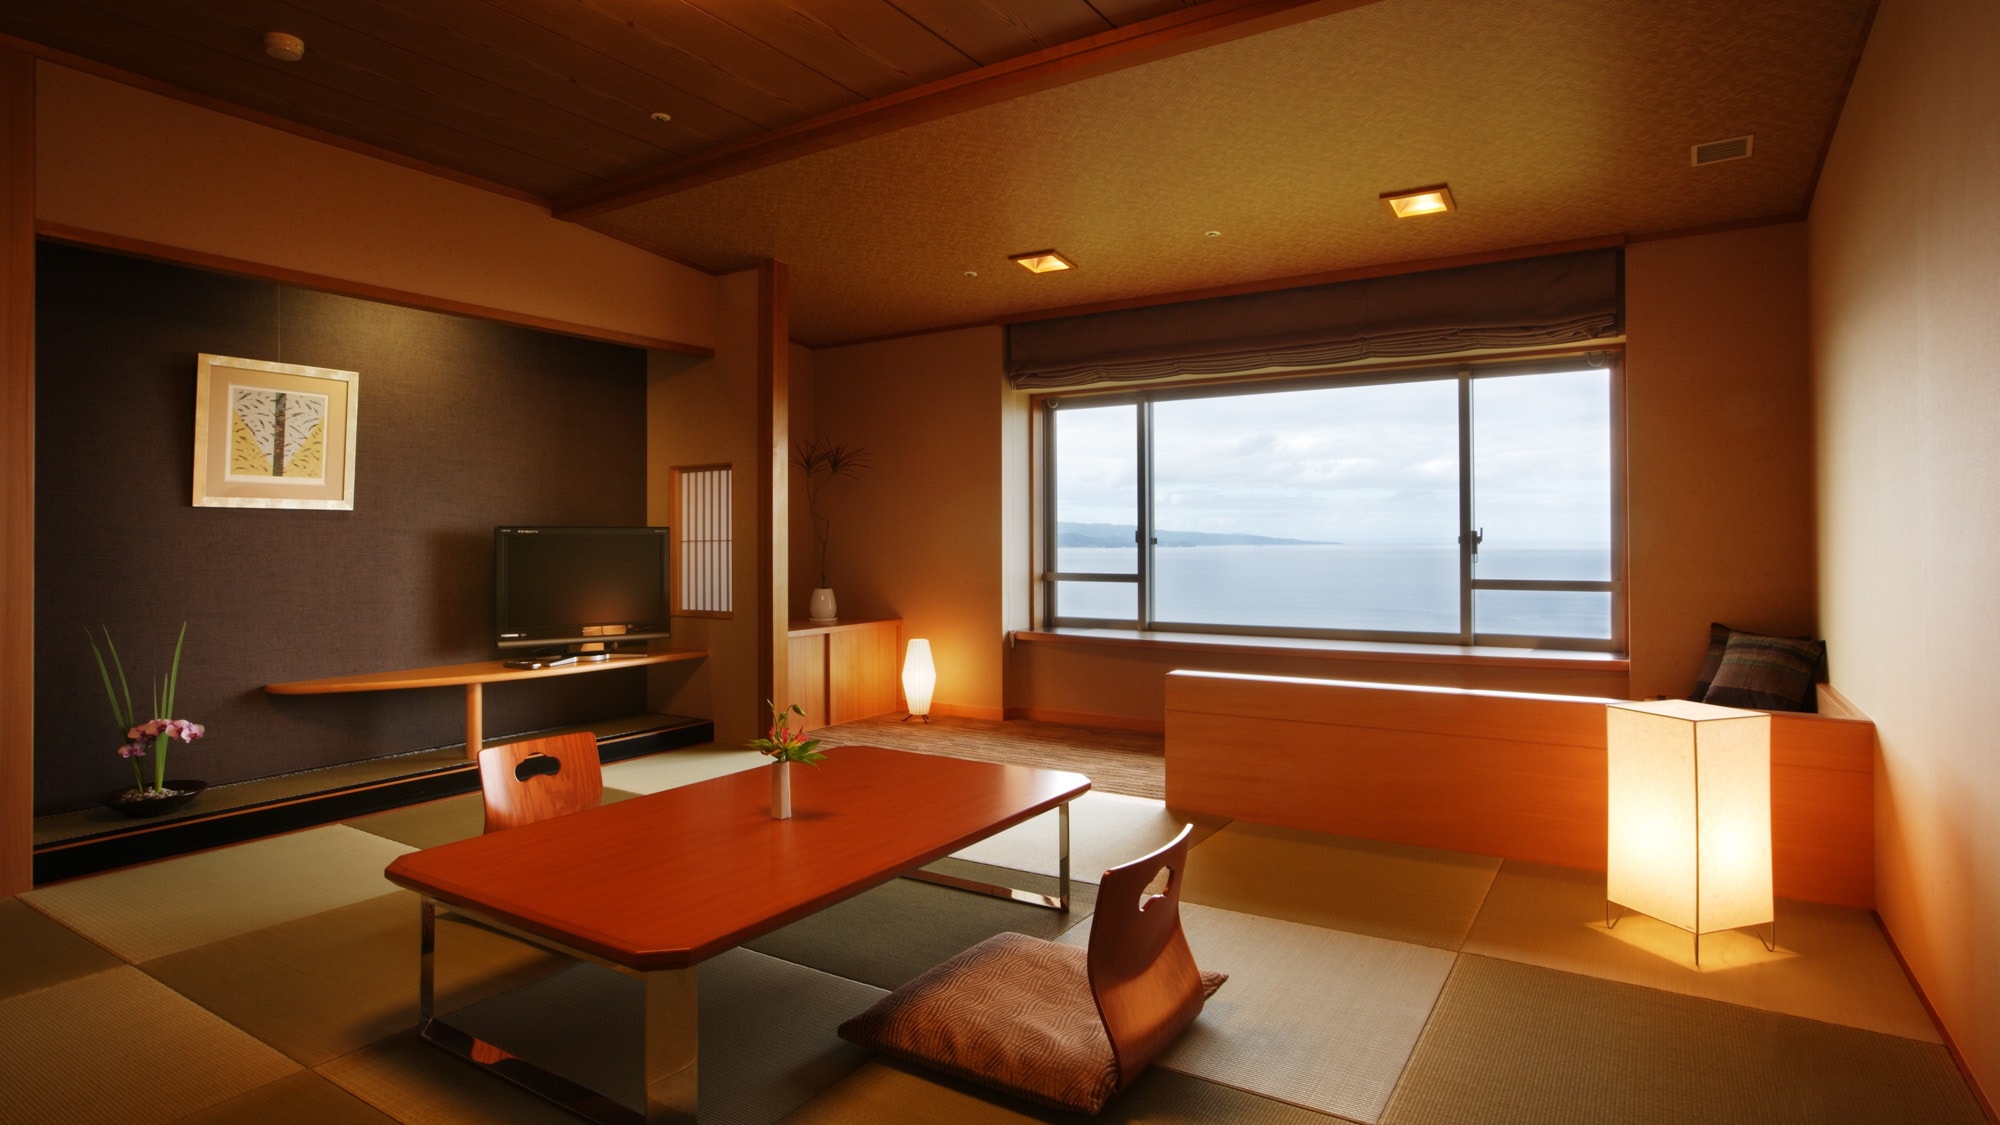 An example of a Japanese-style room on the top floor "Ten no Niwa"